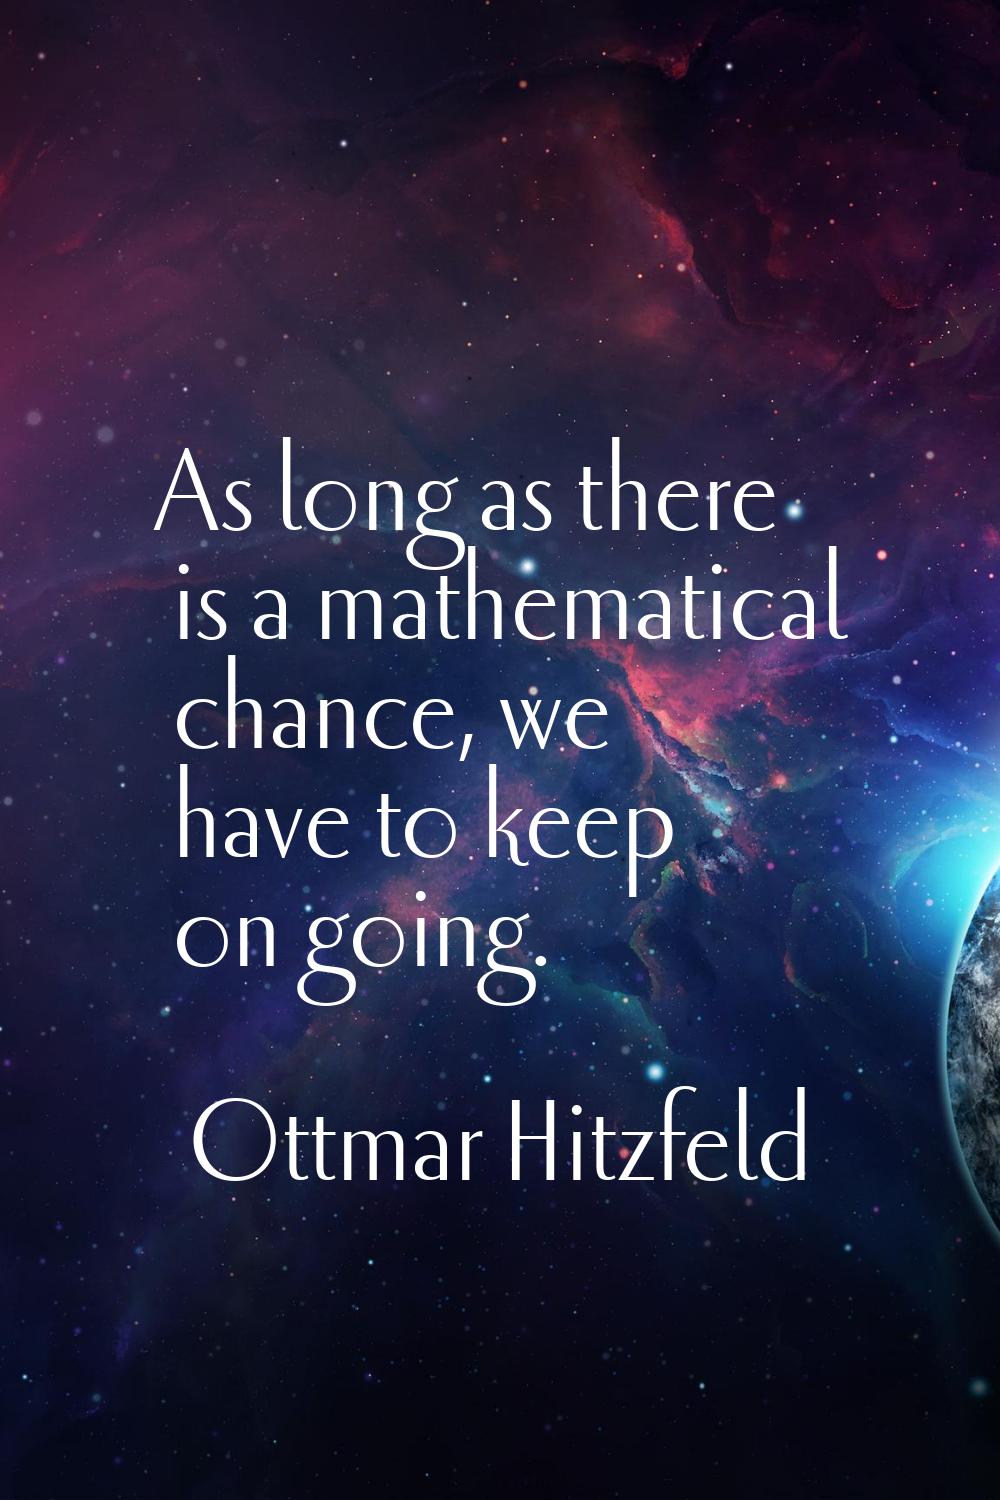 As long as there is a mathematical chance, we have to keep on going.